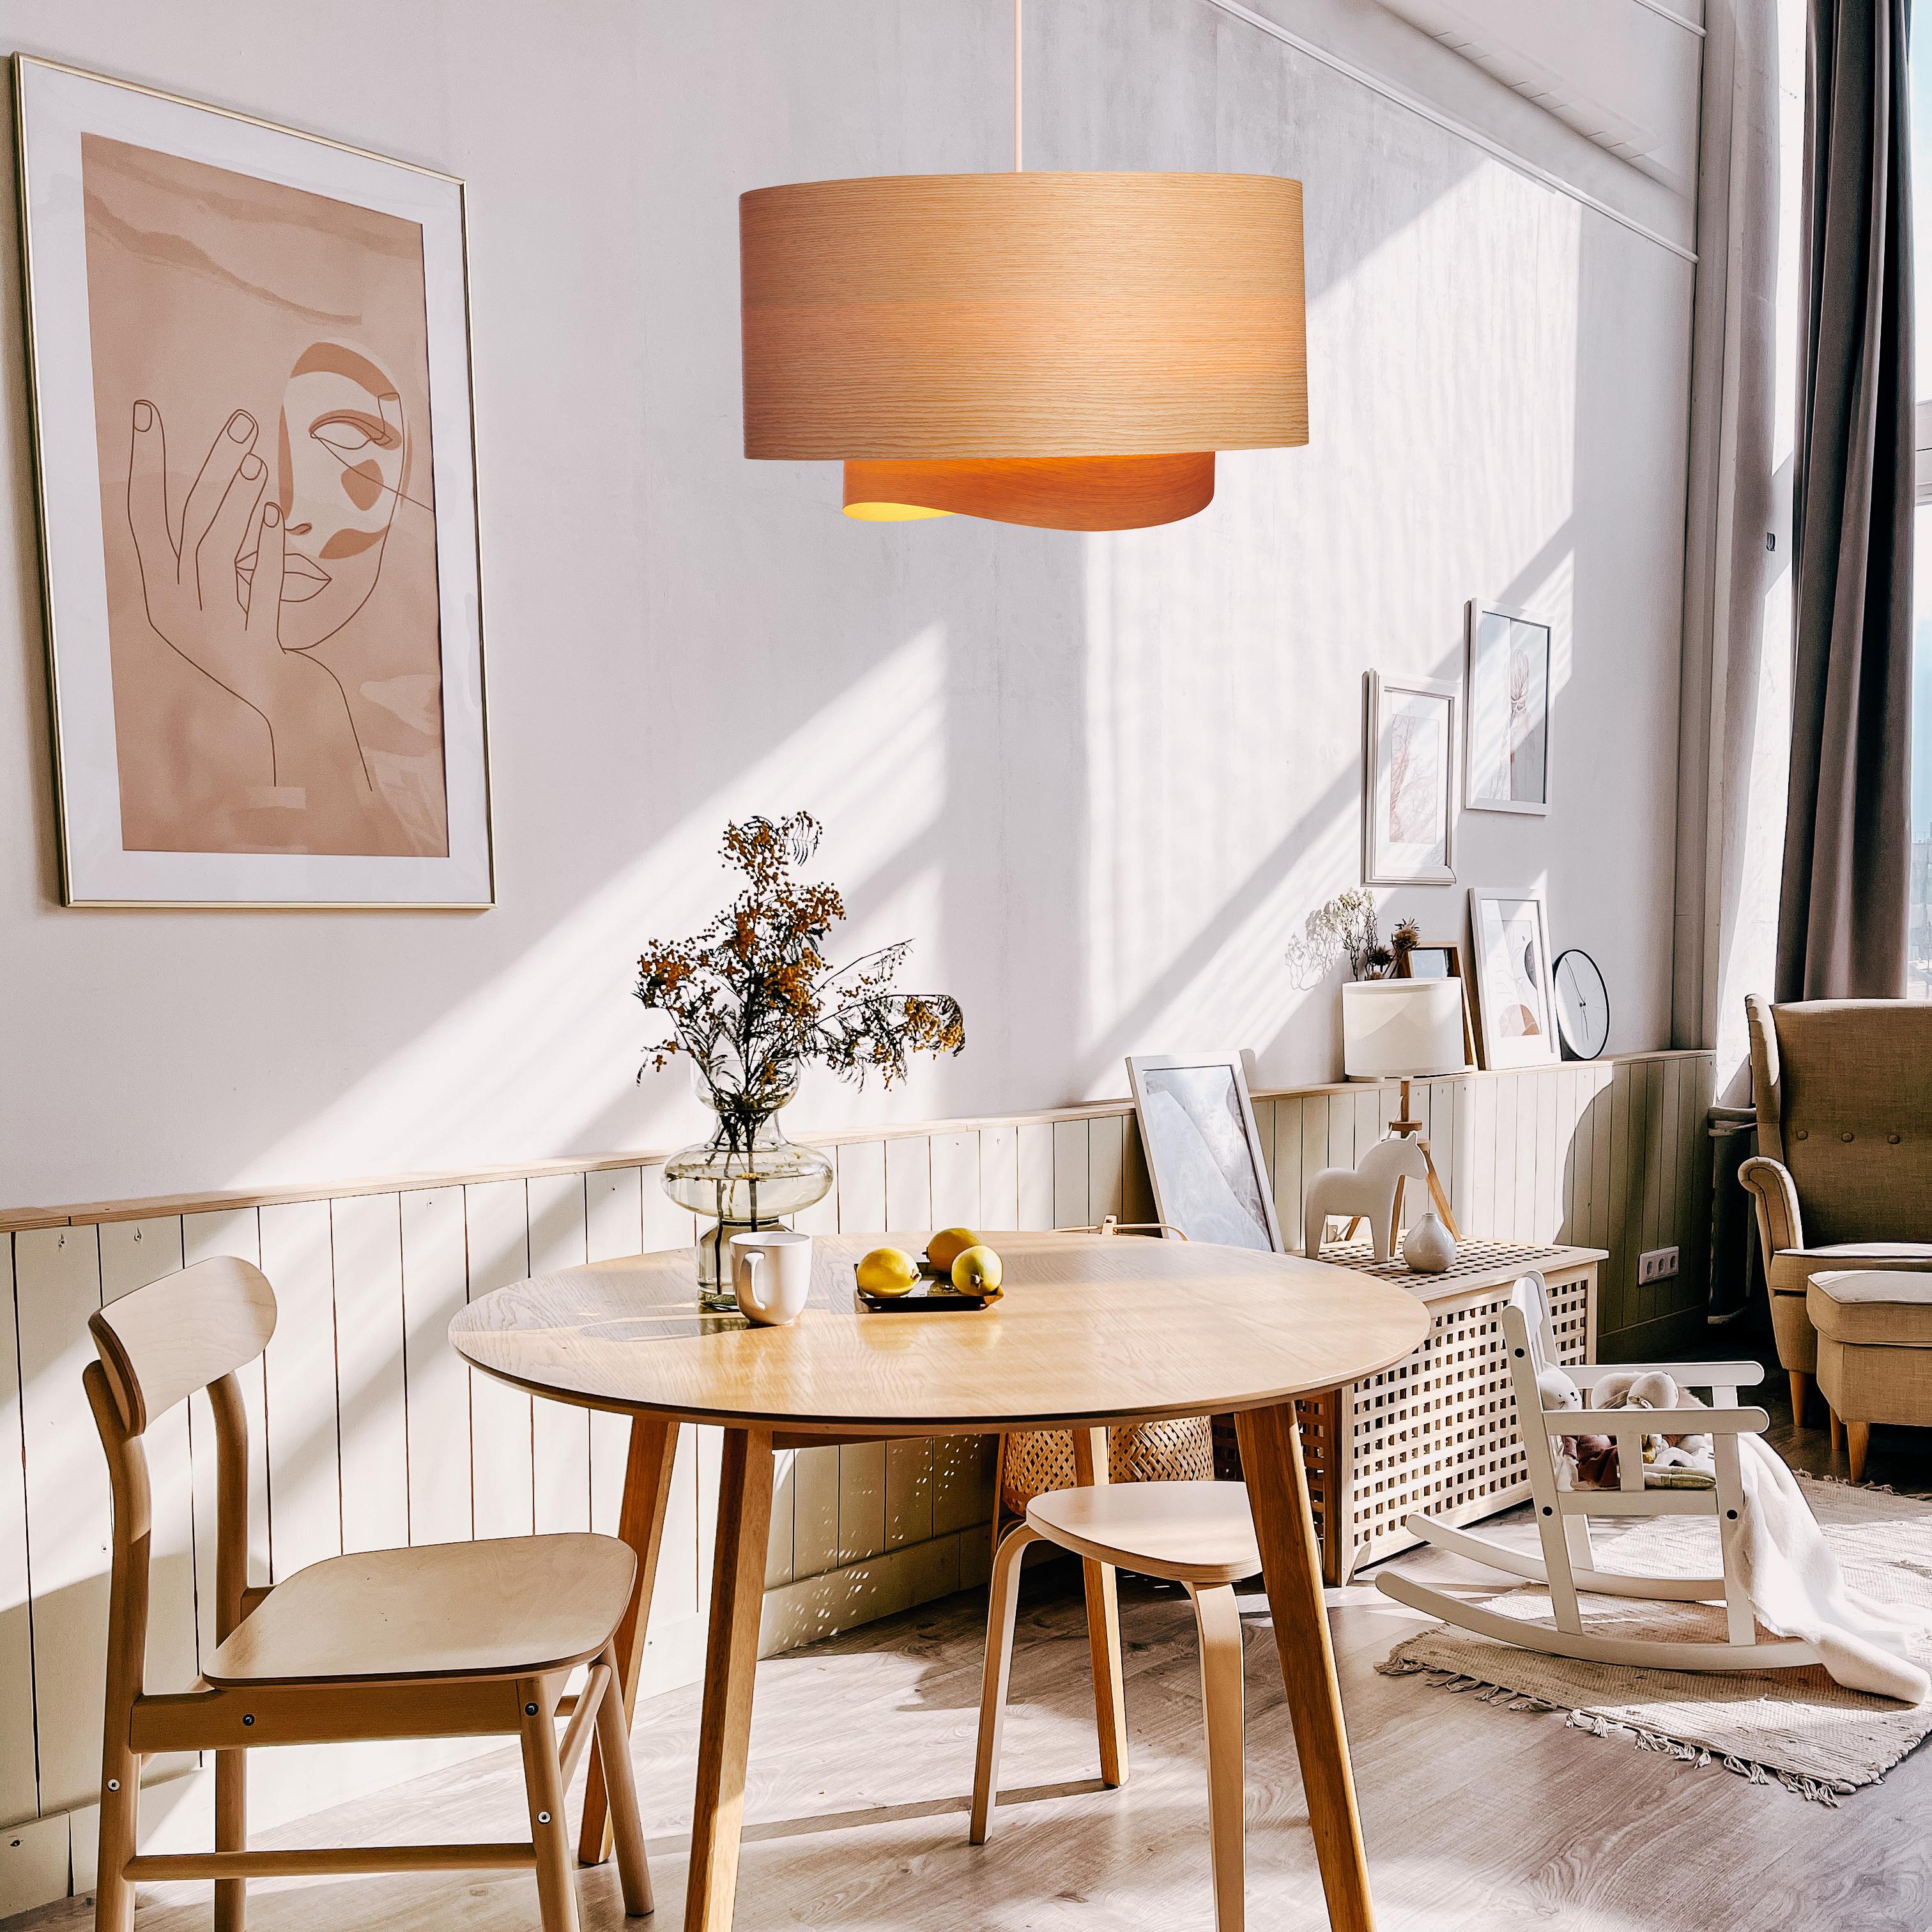 The Half BOWEN pendant light is a stunning, contemporary Mid-Century Modern light fixture with a Scandinavian composition and natural wood veneer construction. This minimalist luxury chandelier pendant design is the perfect way to add a touch of